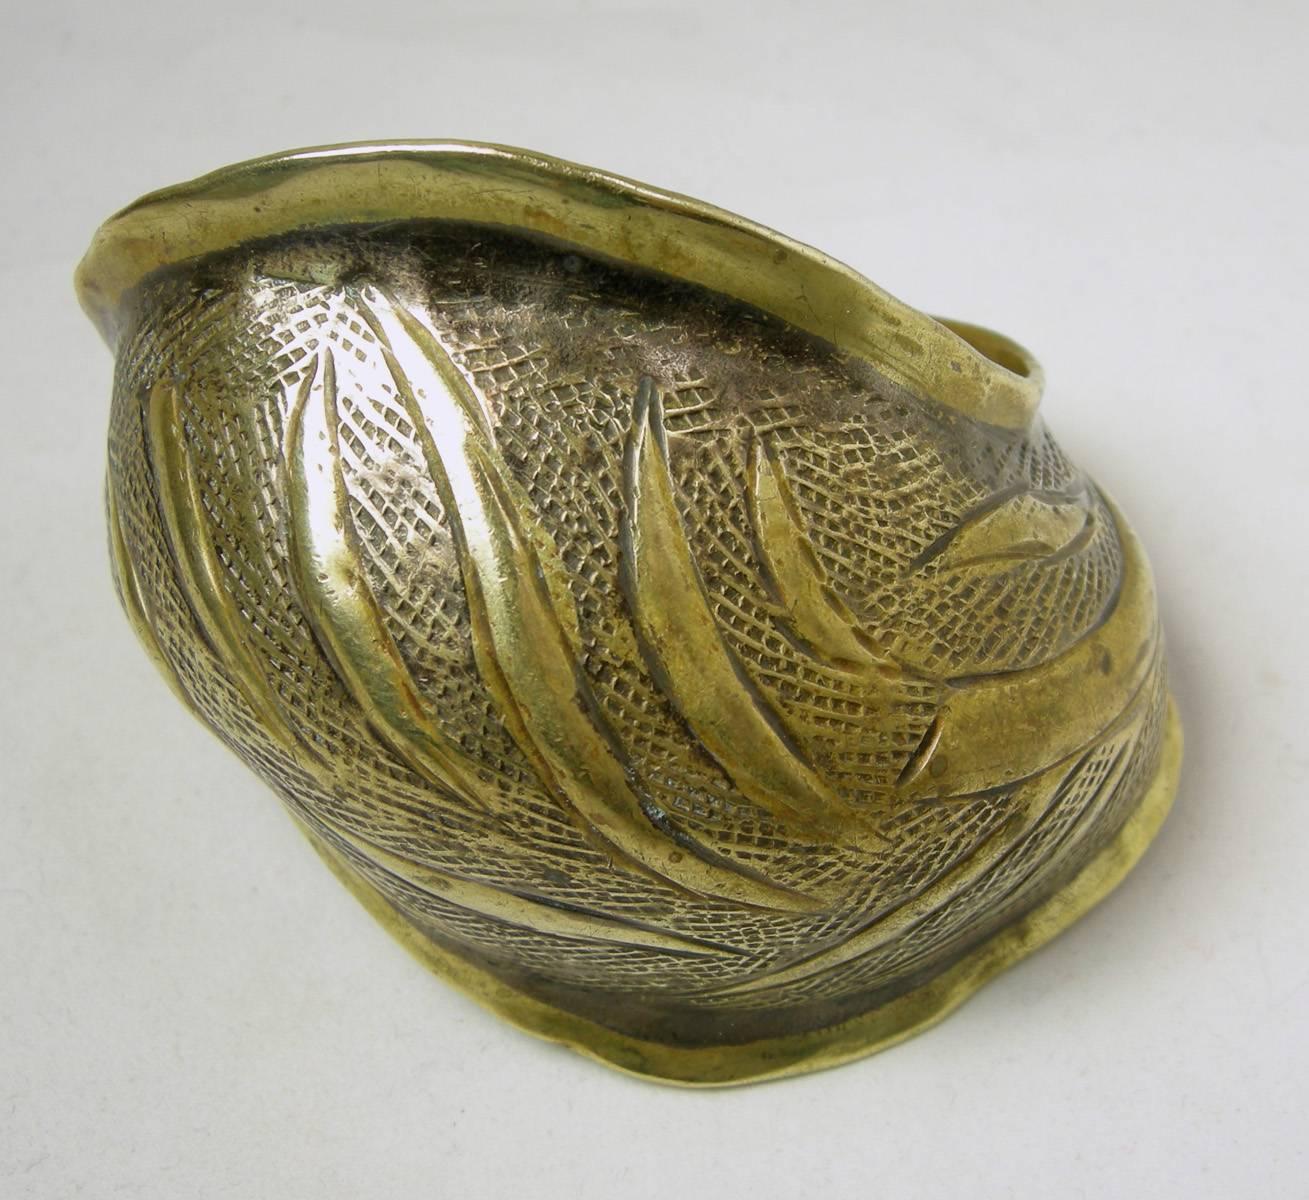 This is a very unusual cuff bracelet made of a bronze metal.  It has a solid mesh design with long solid rods designed throughout.  It is not your normal cuff, which is why I love it.  It is 3” wide at its larges point and 7” circumference.  It’s in